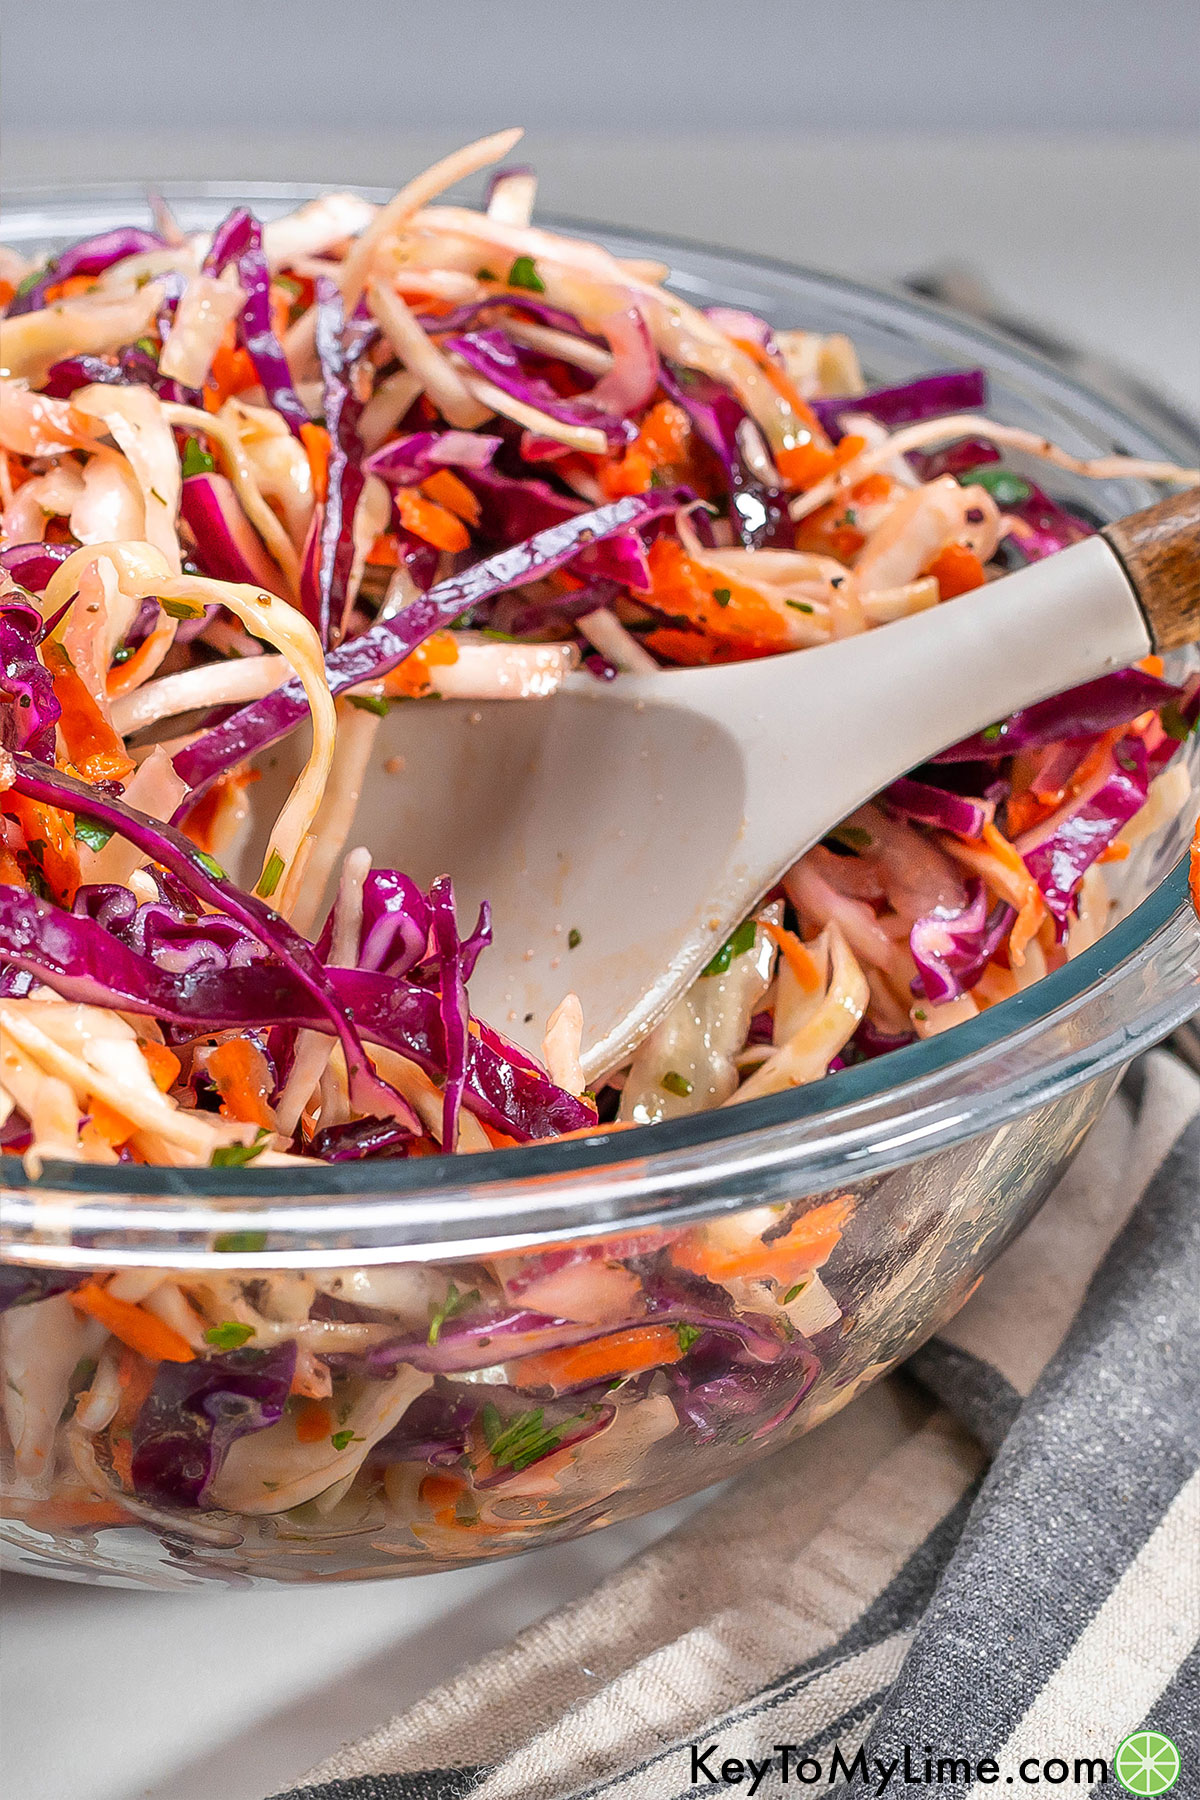 A close up image showing the texture of the mixed coleslaw on a serving spoon.